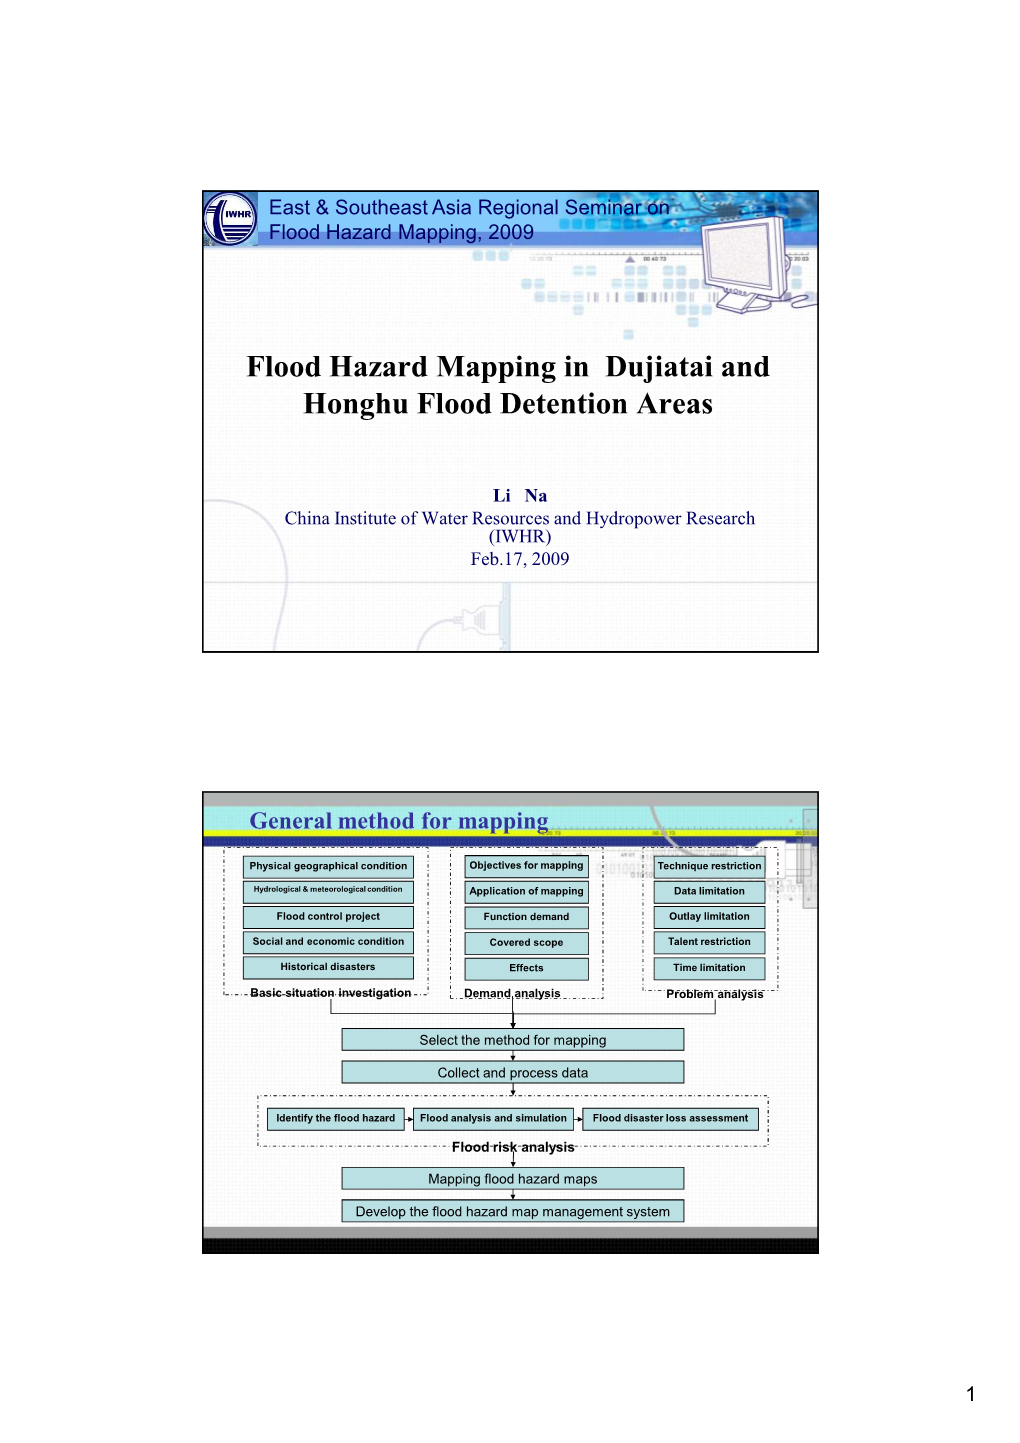 Flood Hazard Mapping in Dujiatai and Honghu Flood Detention Areas